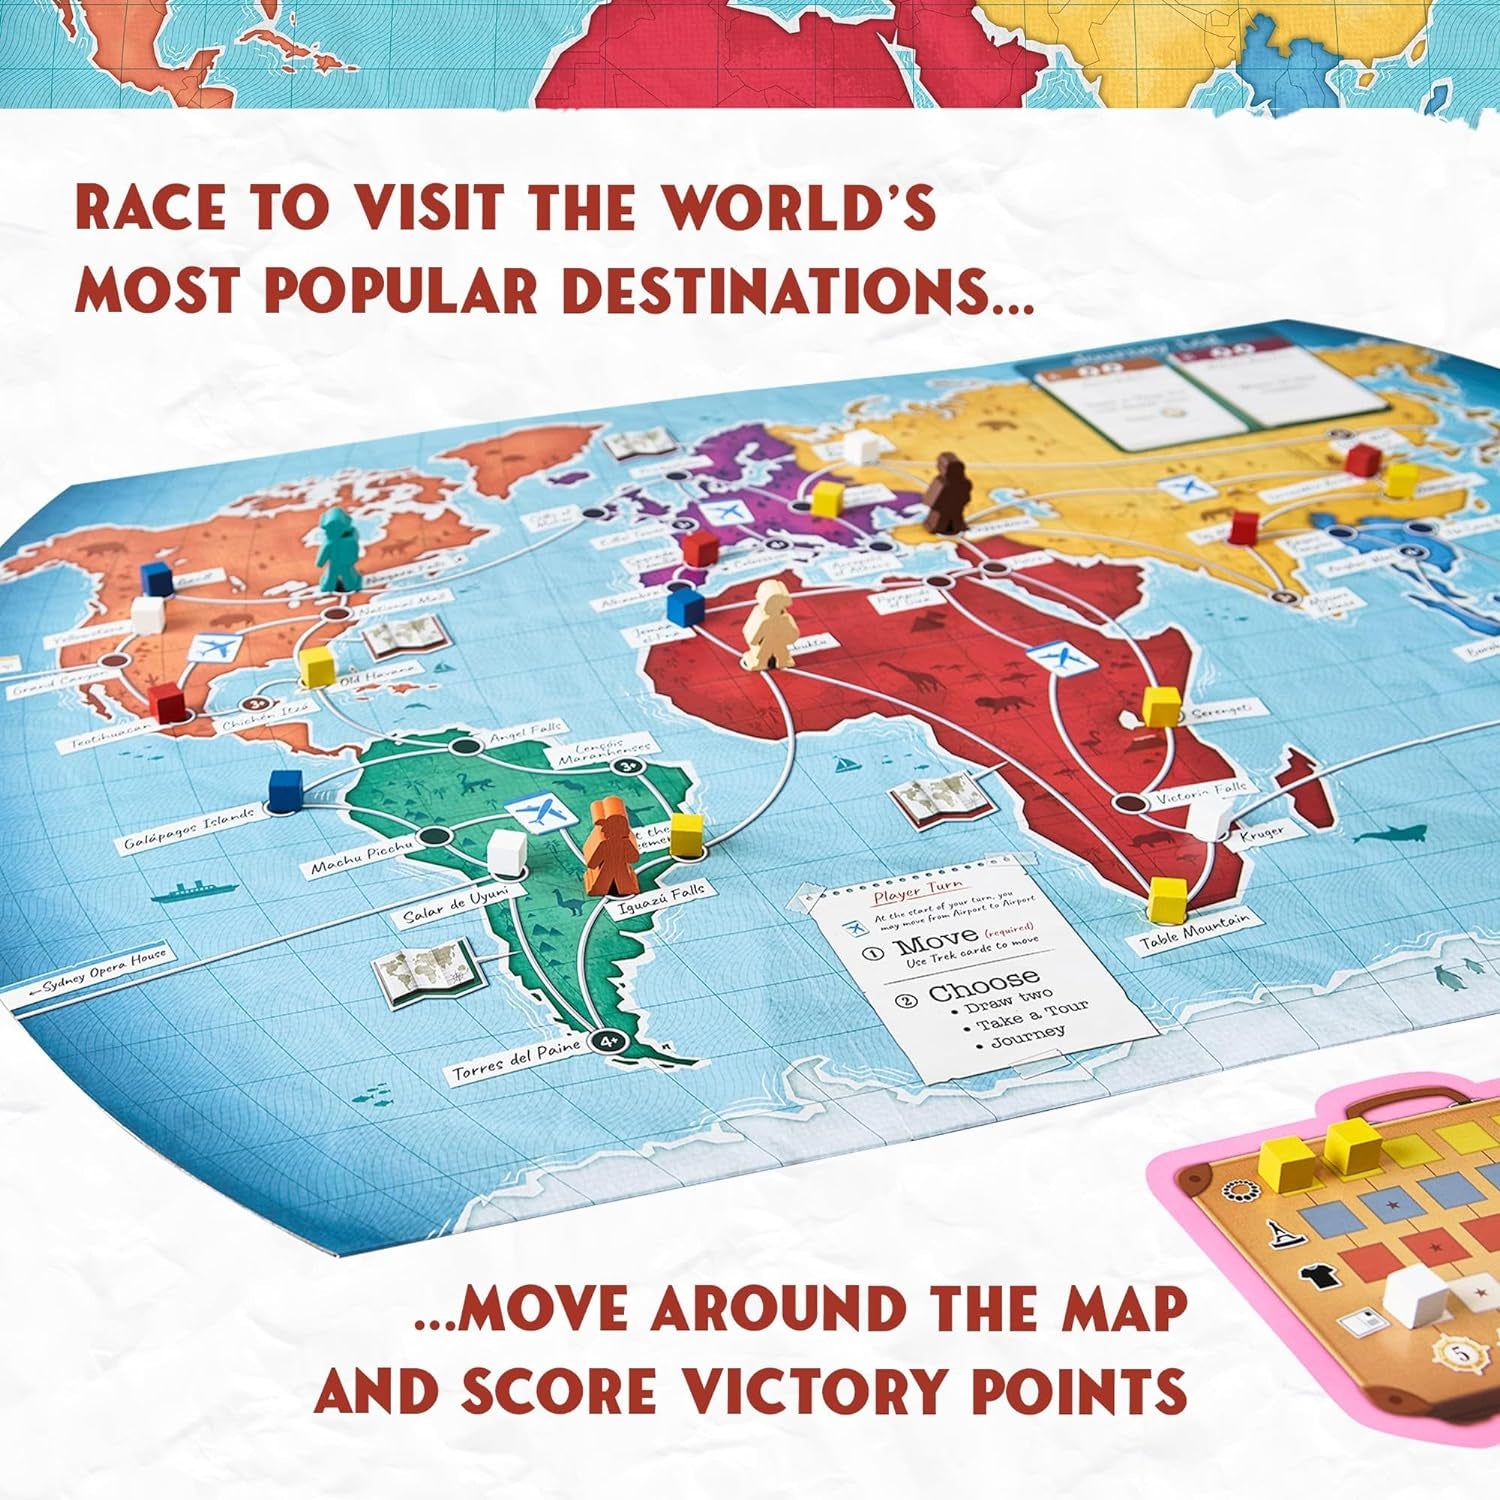 Trekking the World - the Award-Winning Board Game for Family Night | Explore the Wonders of the World | Perfect for Kids & Adults | Ages 10 and Up